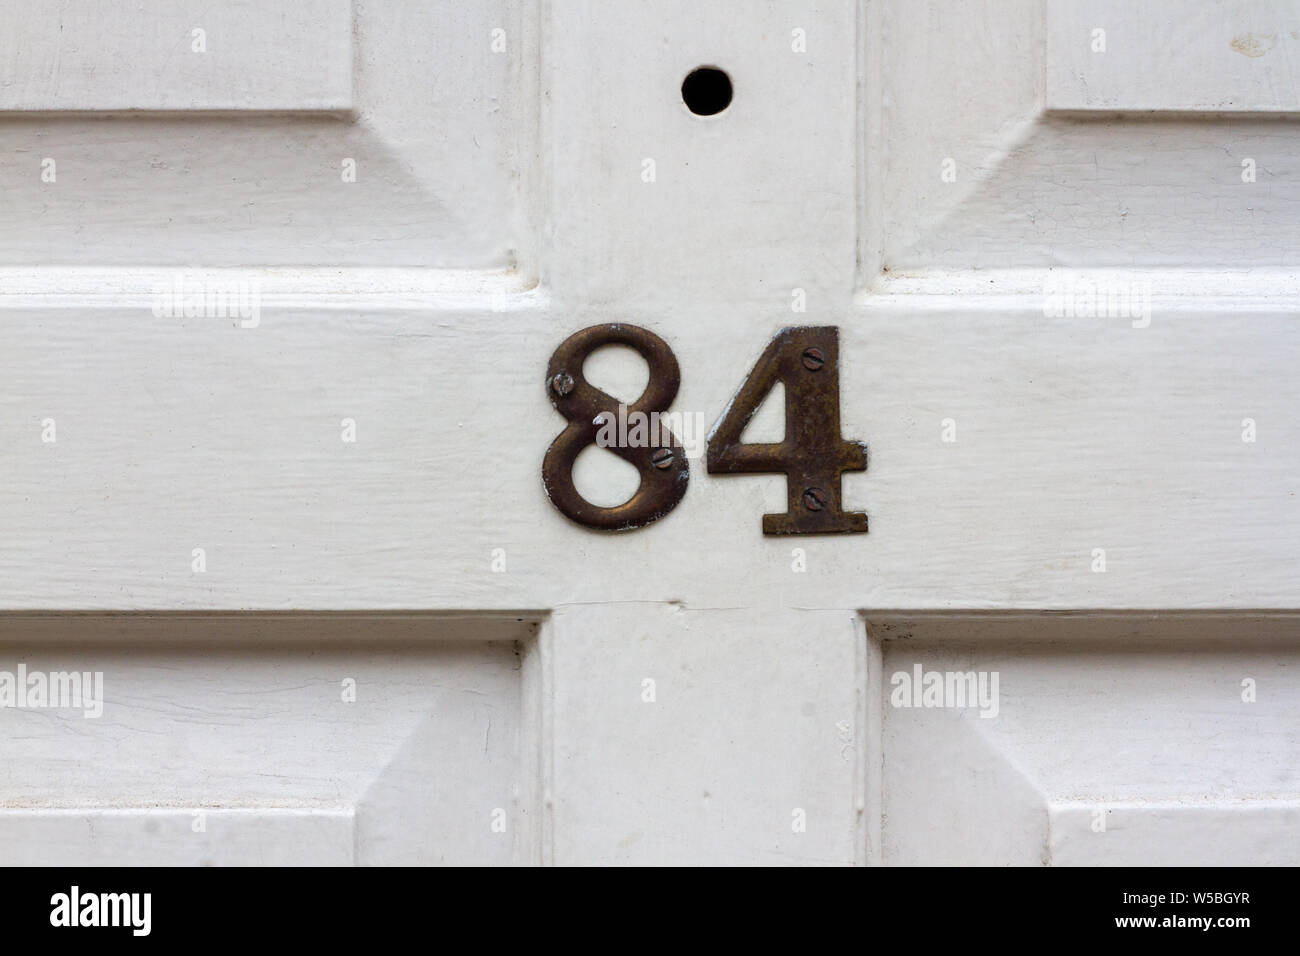 House number 84 on a white wooden front door Stock Photo